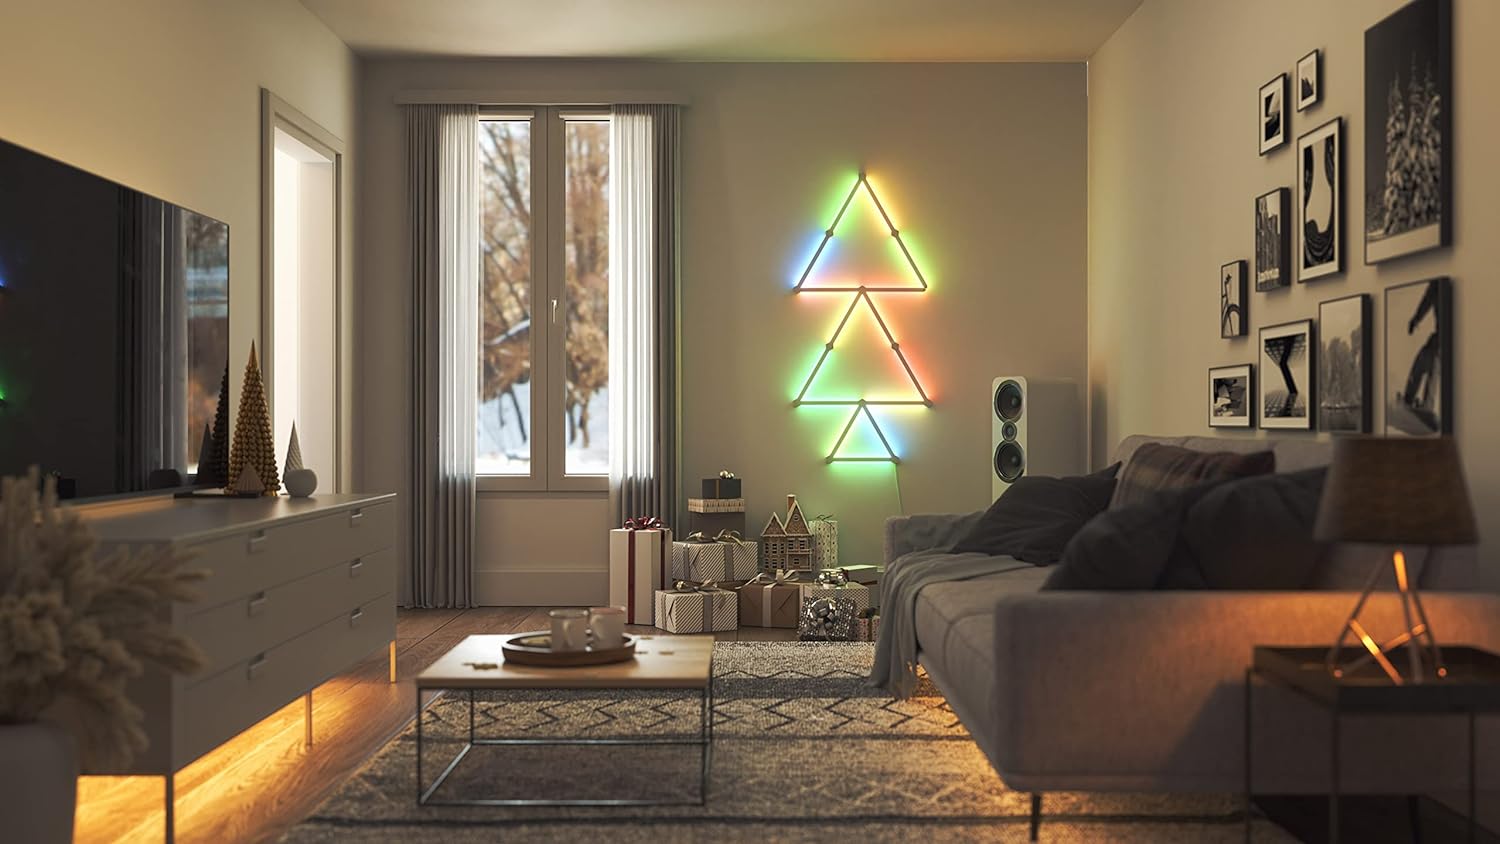 Nanoleaf Lines Starter Kit Modular Backlit Illumination, Smart Wifi Led System W/Music Visualizer, Instant Wall Decoration, Home Or Office Use, 16M+ Colors, Low Energy Consumption 15 Pack, White